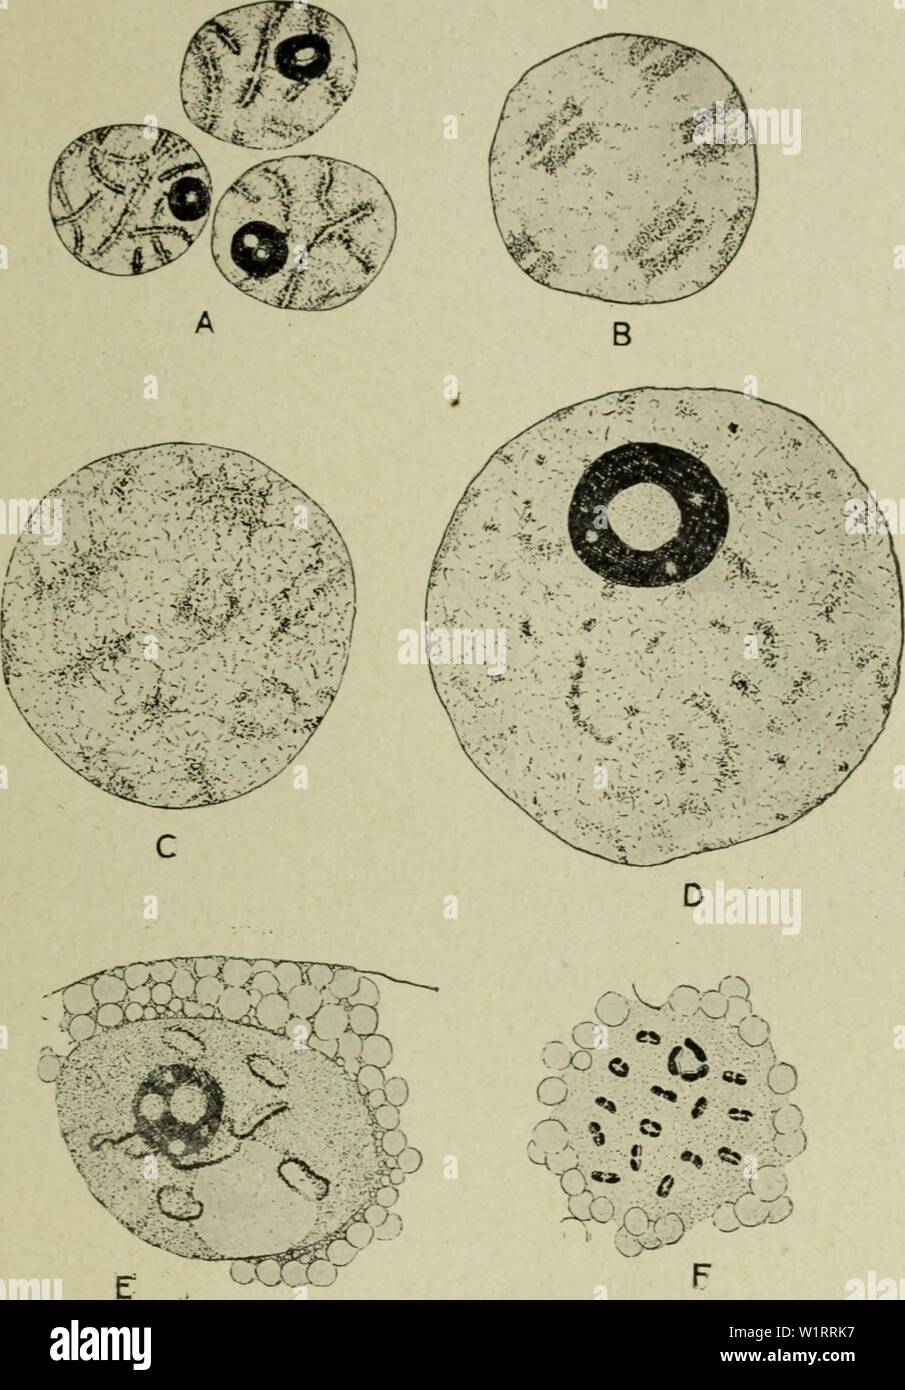 Archive image from page 76 of Cytology, with special reference to. Cytology, with special reference to the metazoan nucleus  cytologywithspec00agar 0 Year: 1920 ii MEIOSIS IN THE FEMALE 6l germinal vesicles with diffuse chromosomes are to be found, and it is evident that the bivalents resulting from syndesis condense continuously    Fig. 25. The chromosomes during the oogenesis of Diaptomus castor from the pachytene stage (A), through the germinal vesicle stage (B-E) to the condensation of the definitive bivalents (F). (Matschek, A.Z., 1910.) into the definitive bivalents of metaphase I. Anima Stock Photo